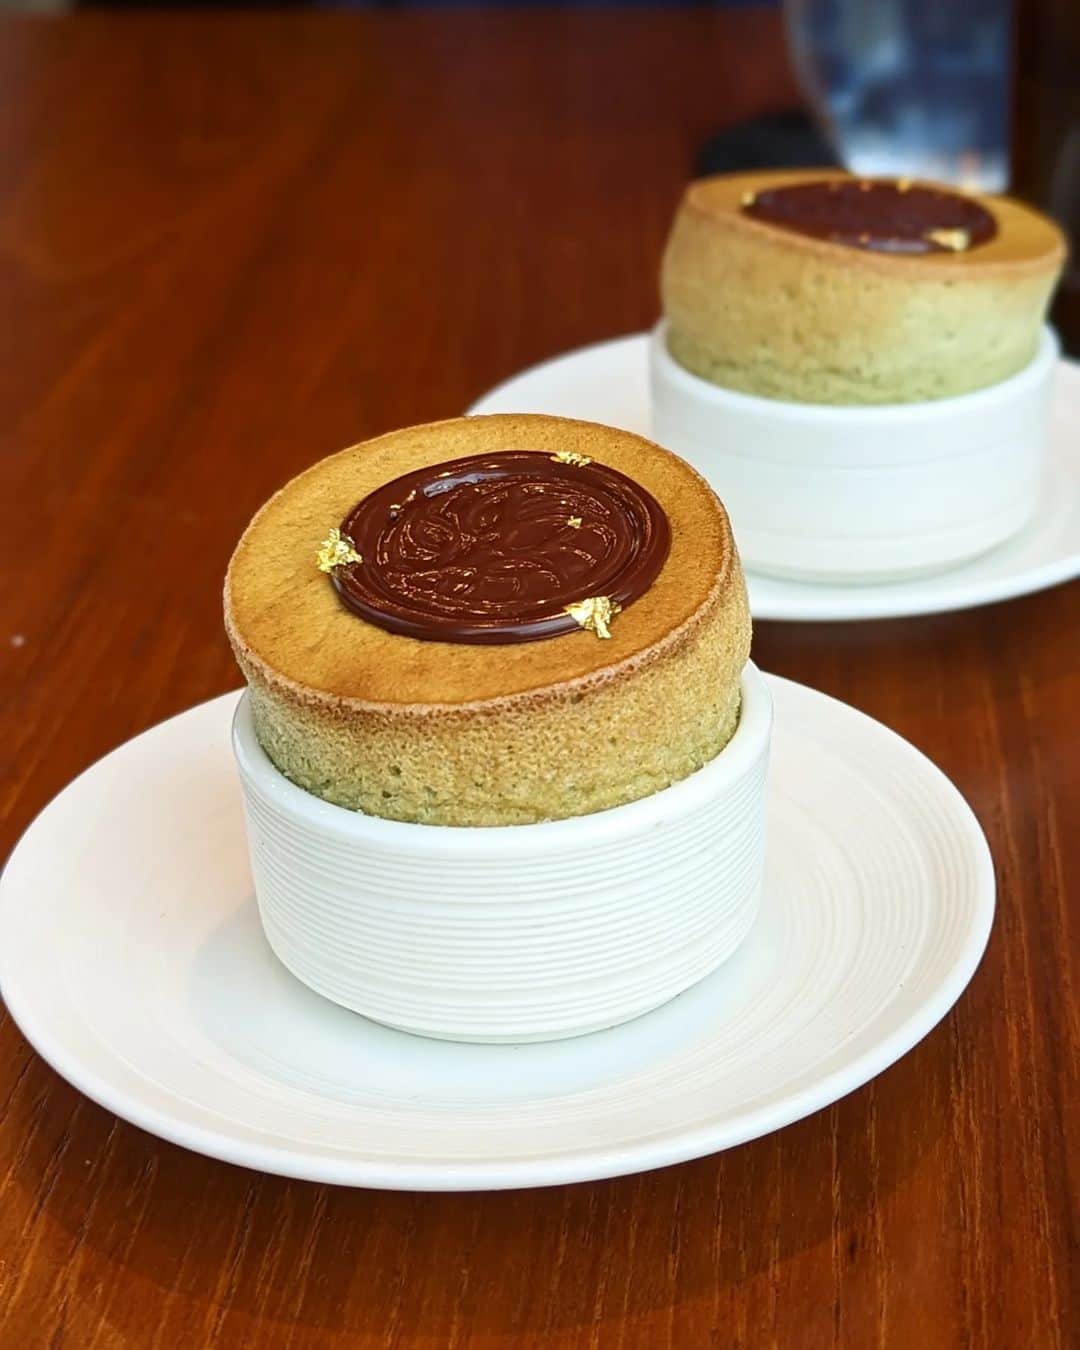 Li Tian の雑貨屋のインスタグラム：「Ain't I such a lucky person to catch my fav Pistachio as one of the core flavors in the dessert here? 😋   Iranian Pistachio Souffle  85% Abinao Chocolate with Espresso Cremeux  Full experience on blog.   #sgrestaurant #sgfood #pistachio #desserts #sg #sgfoodie #chocolate #sgblog #michelin #sommer #cbdlunch」